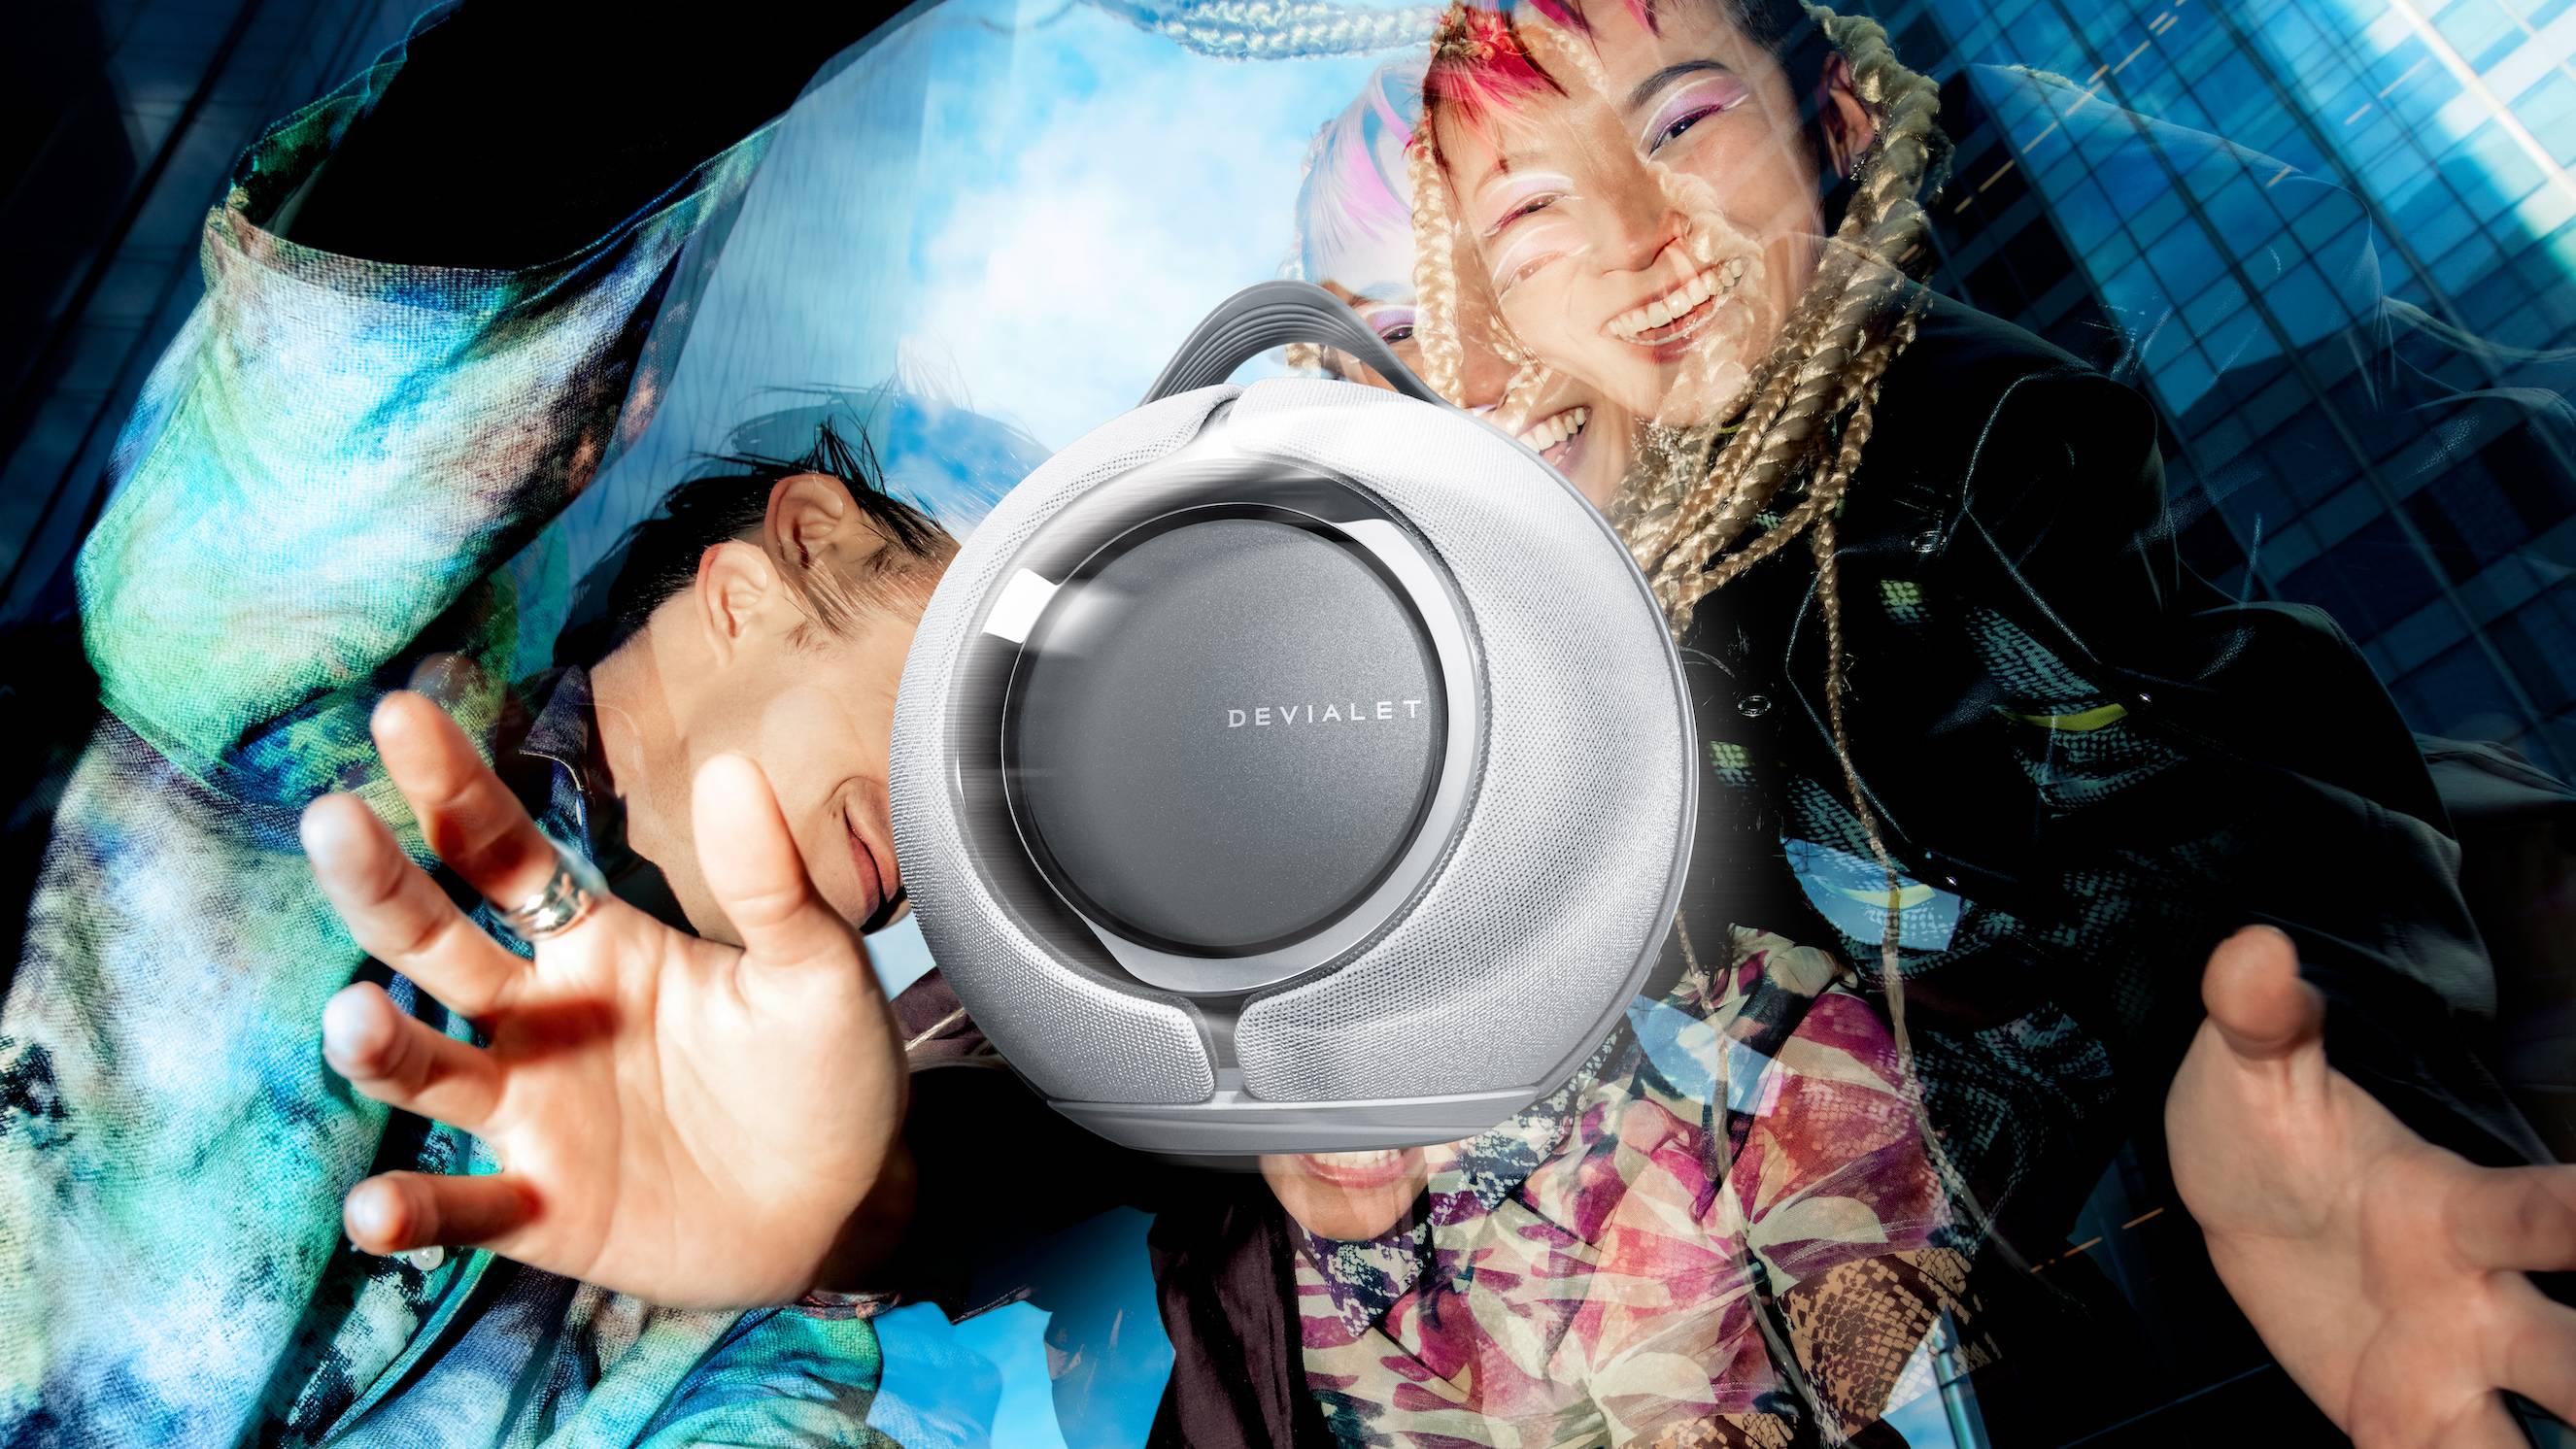 It's Devialet Mania - Portable Smart Speaker with 360 Degree